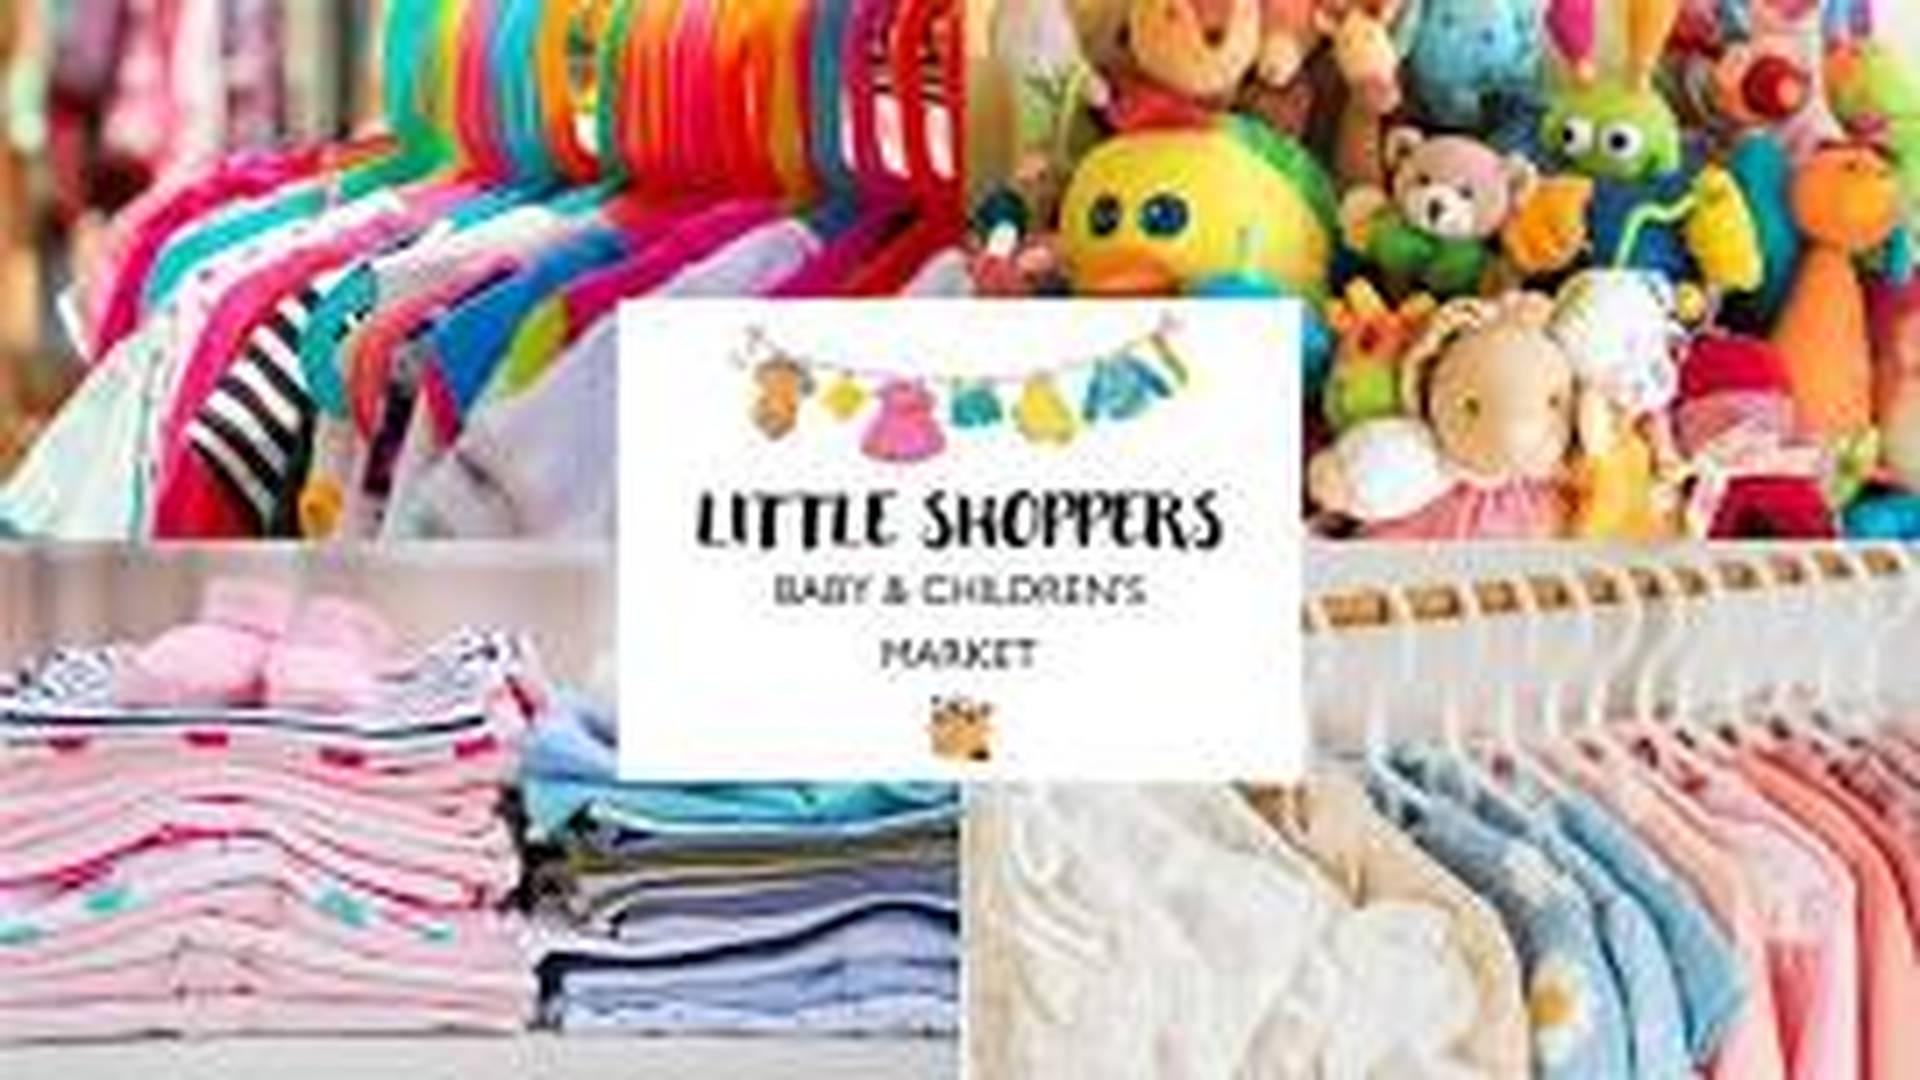 Little Shoppers Baby & Childrens Market photo